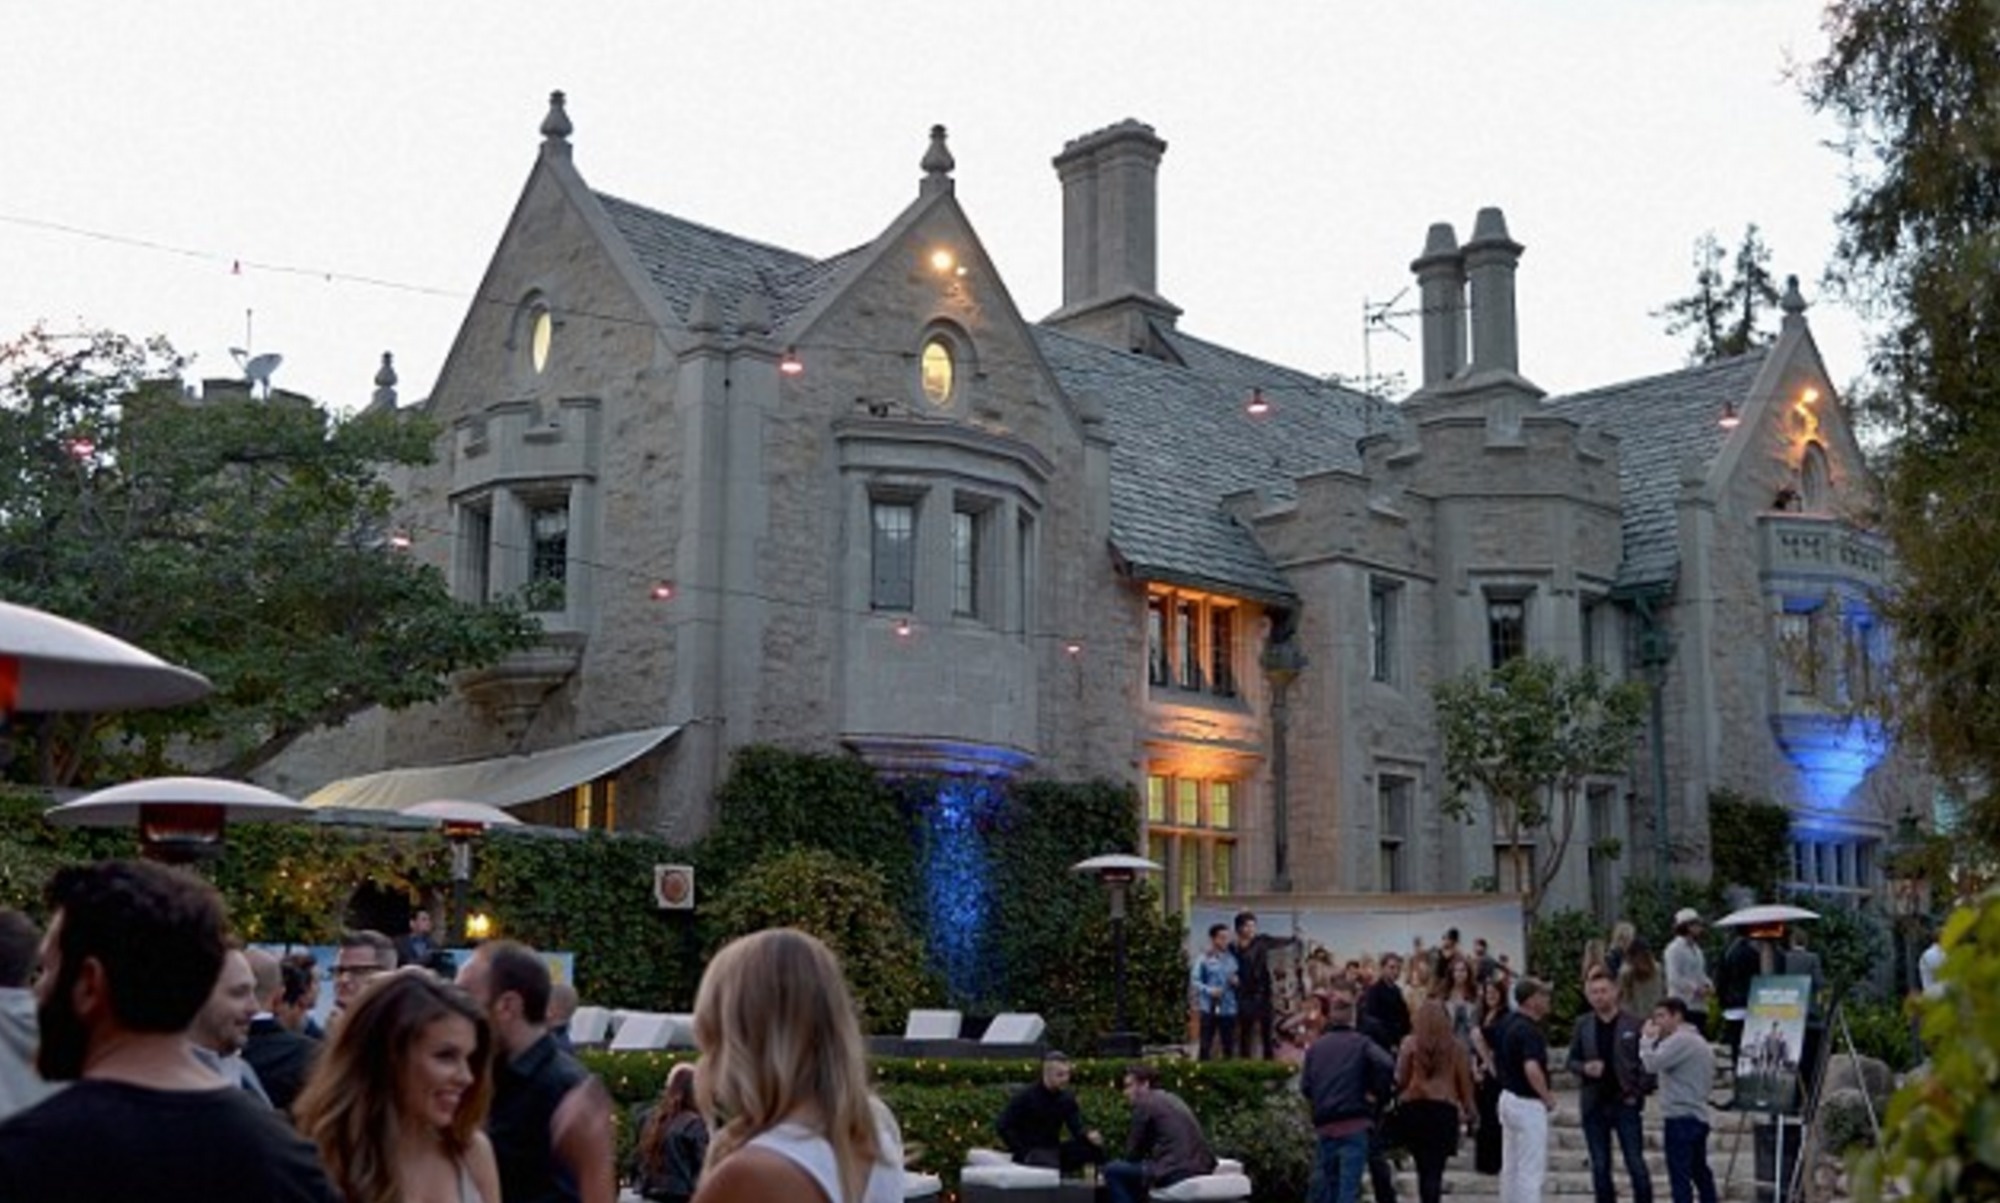 The Playboy mansion is on sale for $200 million but it comes with a catch; Hugh will continue to live there. He bought the mansion in 1971 for $1 million.